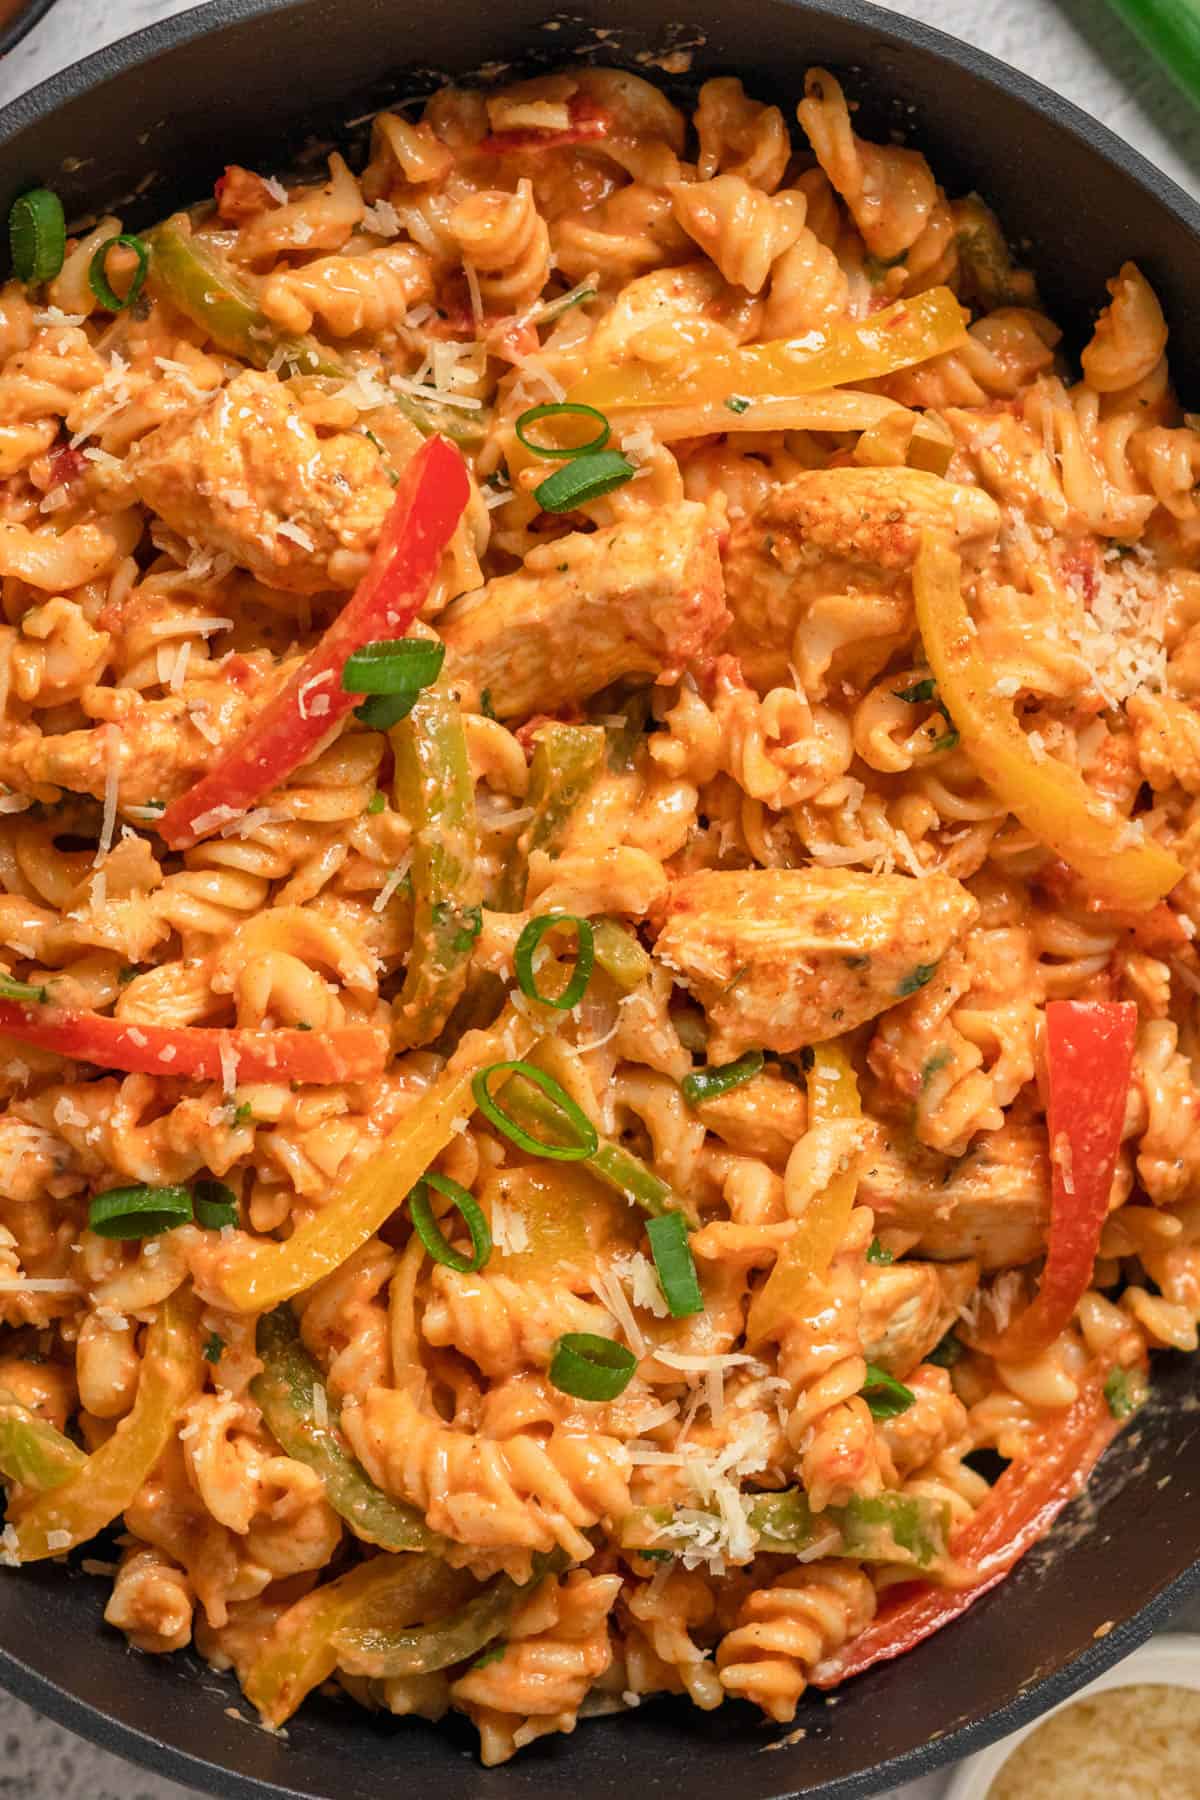 A close image of fusilli pasta with cooked chicken pieces and sliced red, yellow, and green bell peppers.